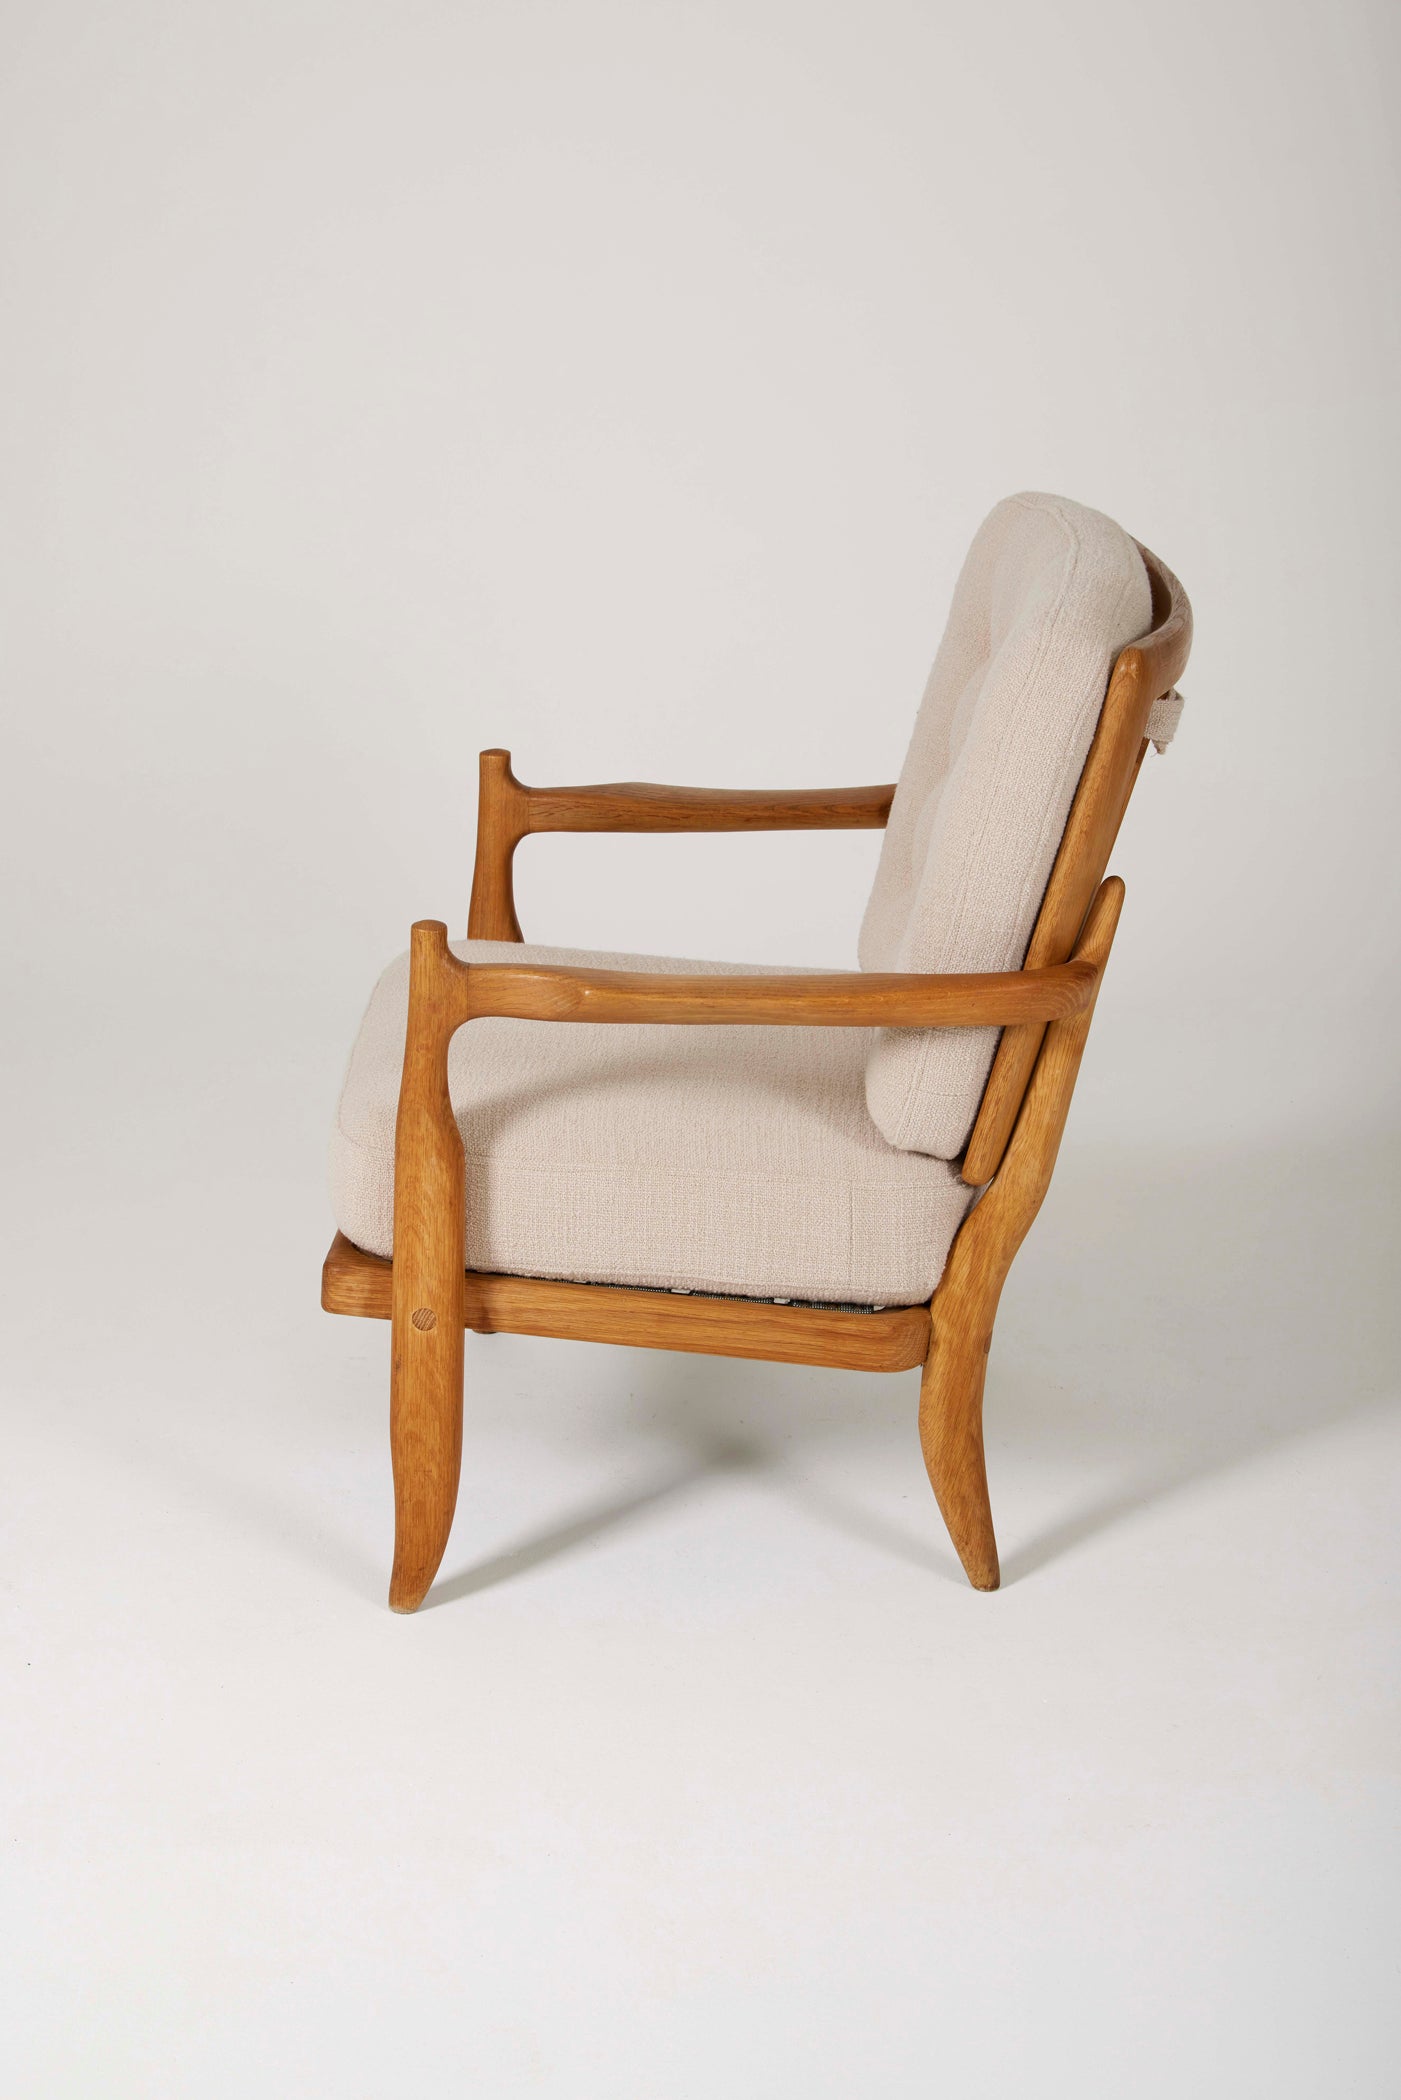 Guillerme and Chambron “Knitter” Armchair